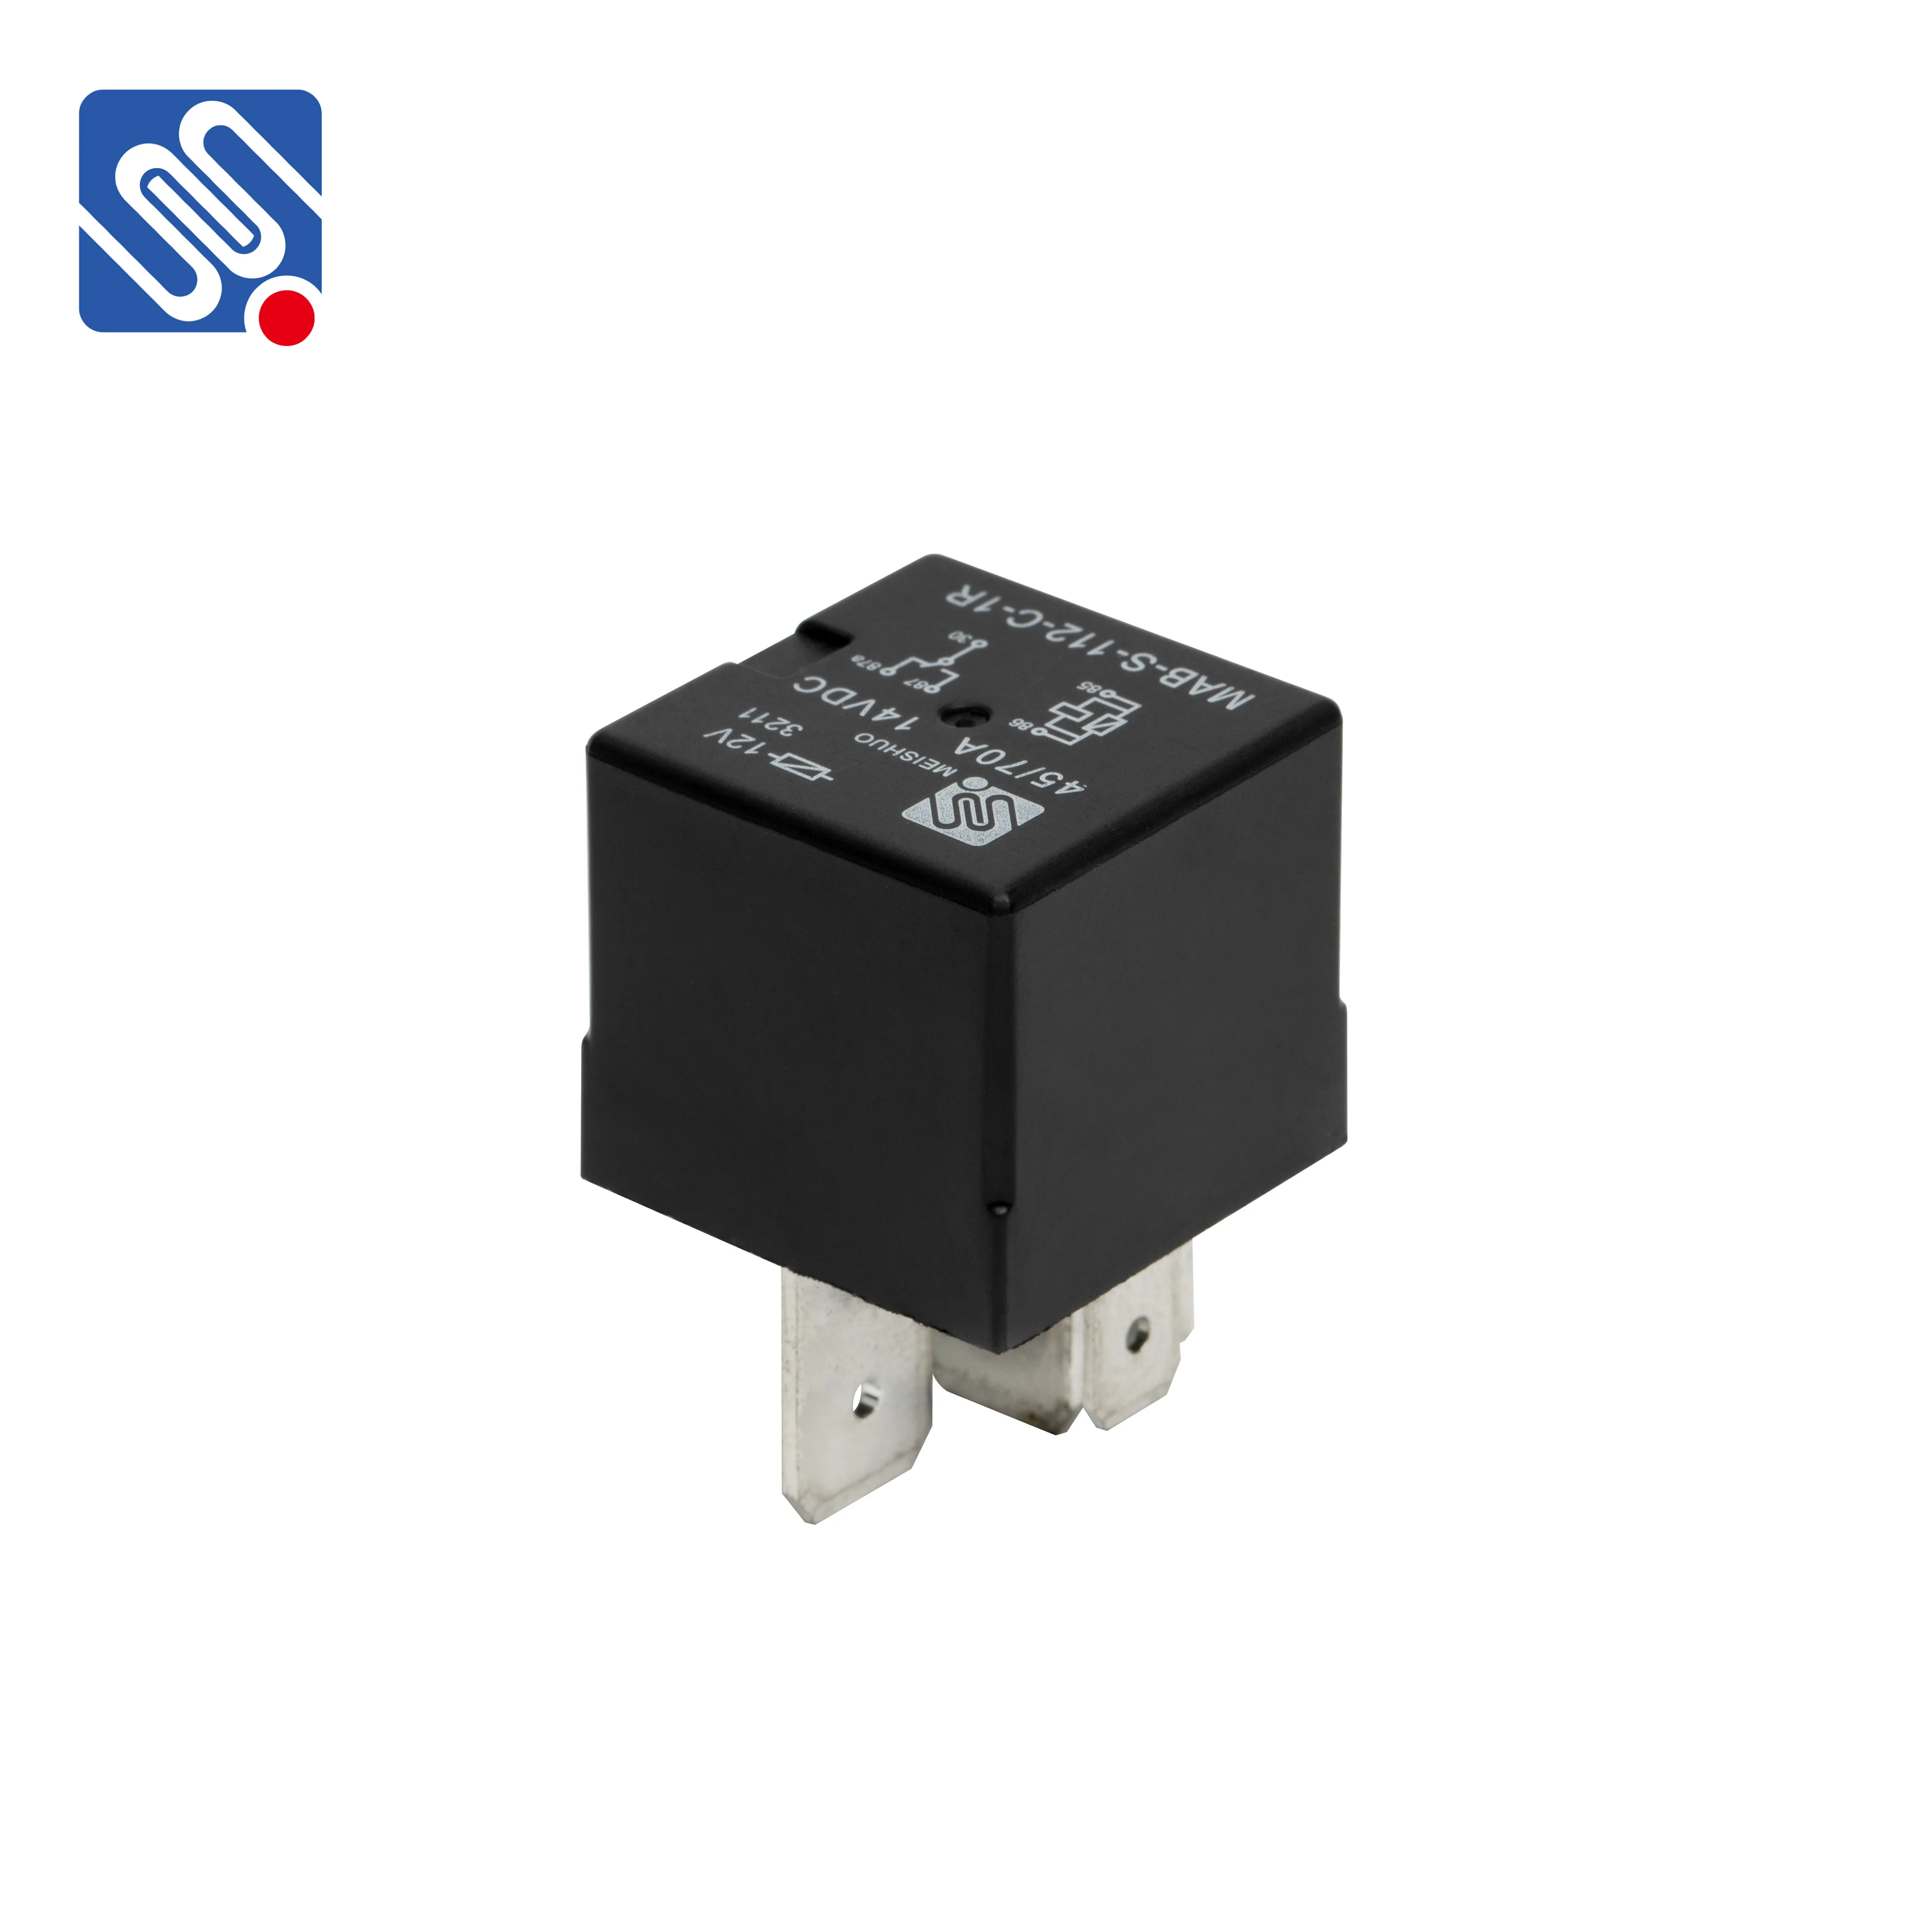 Meishuo MAB-S-112-C-1R 5 pin auto relay 45A 70A good price 12v automotive car relay factory